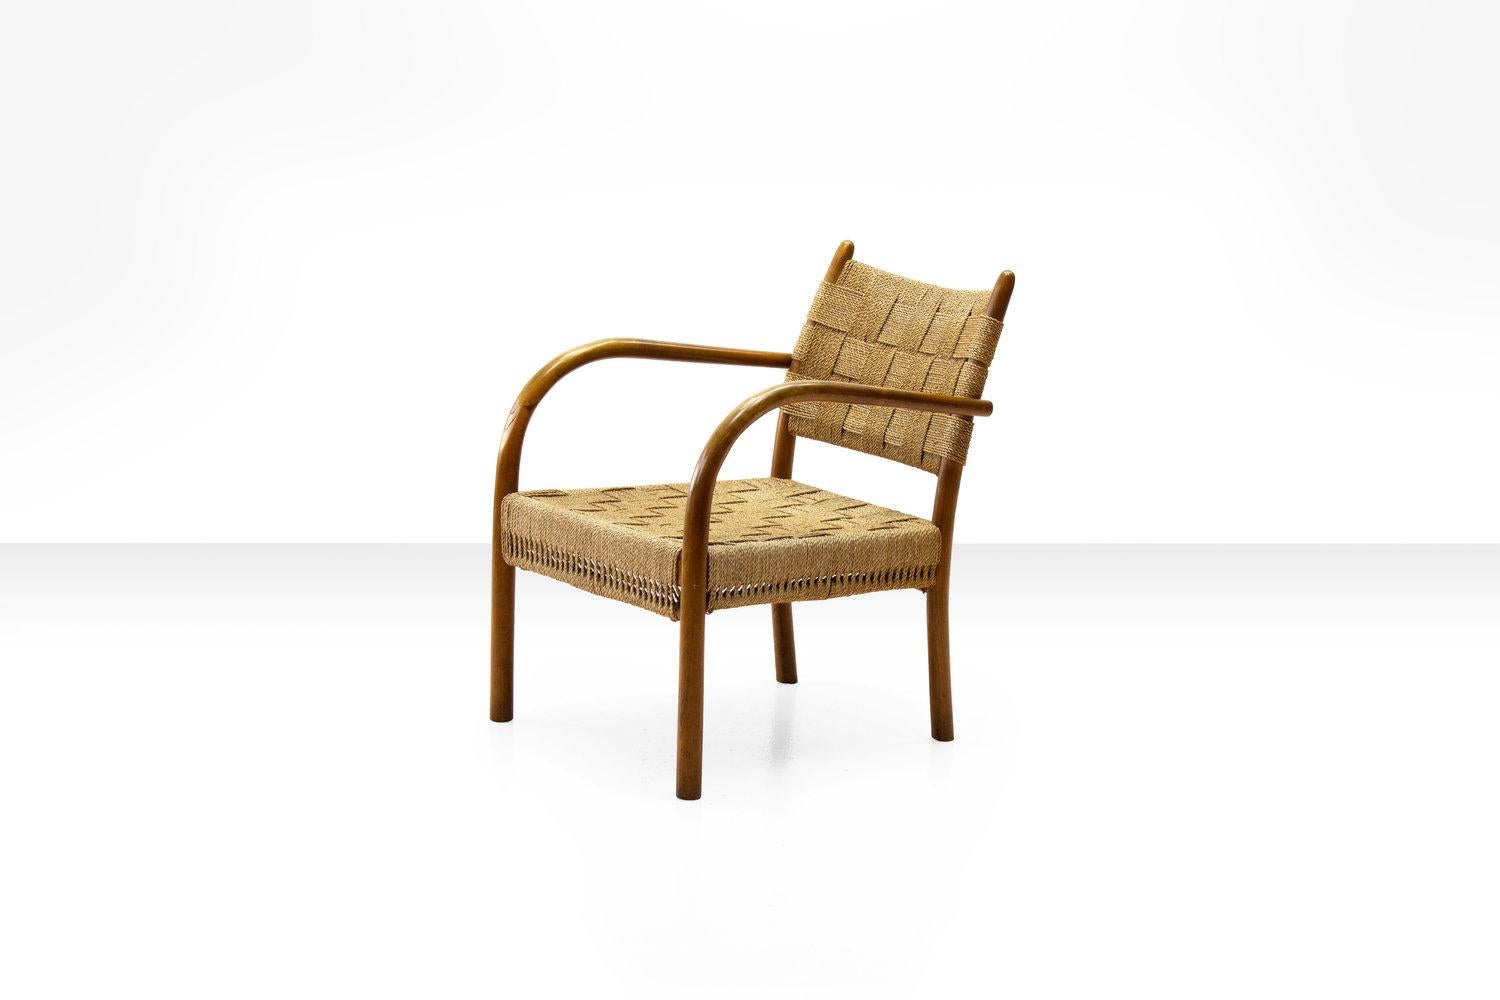 Beech armchair with woven papercord seat and back by K. Scröder, Denmark 1938. Model 1459. Manufactured by Fritz Hansen, 1930s-1940s.

Until recently this rare and sought after armchair was commonly attributed to Frits Schlegel. However a closer